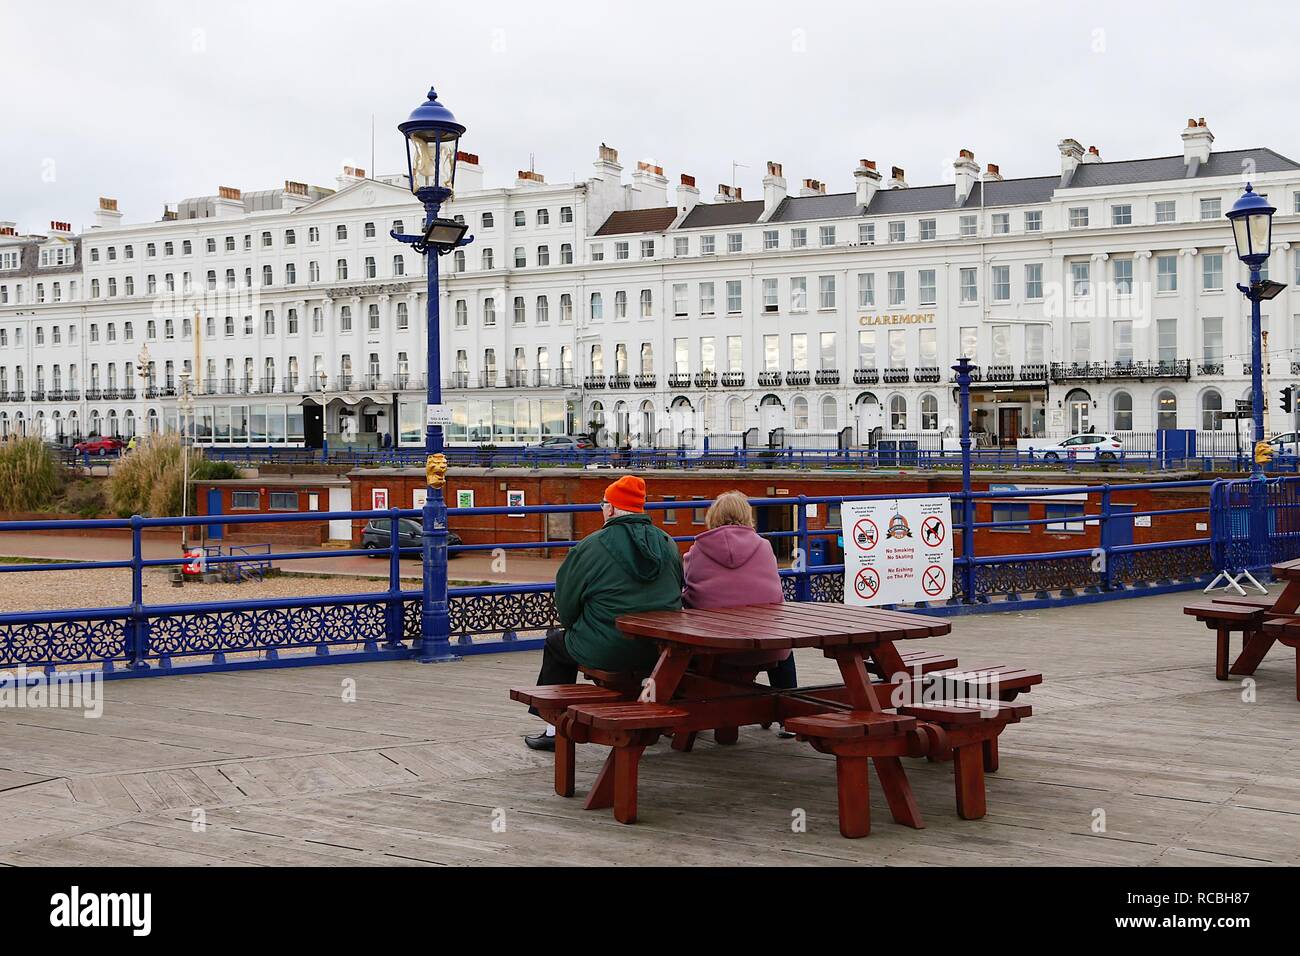 Eastbourne, East Sussex, UK. 15 Jan, 2019. UK Weather: A bright but chilly mid morning in Eastbourne on the seafront promenade with people jogging and taking a walk enjoying the dry weather. An older couple sit on a bench looking at the hotels on the beach front including the claremont. © Paul Lawrenson 2018, Photo Credit: Paul Lawrenson / Alamy Live News Stock Photo